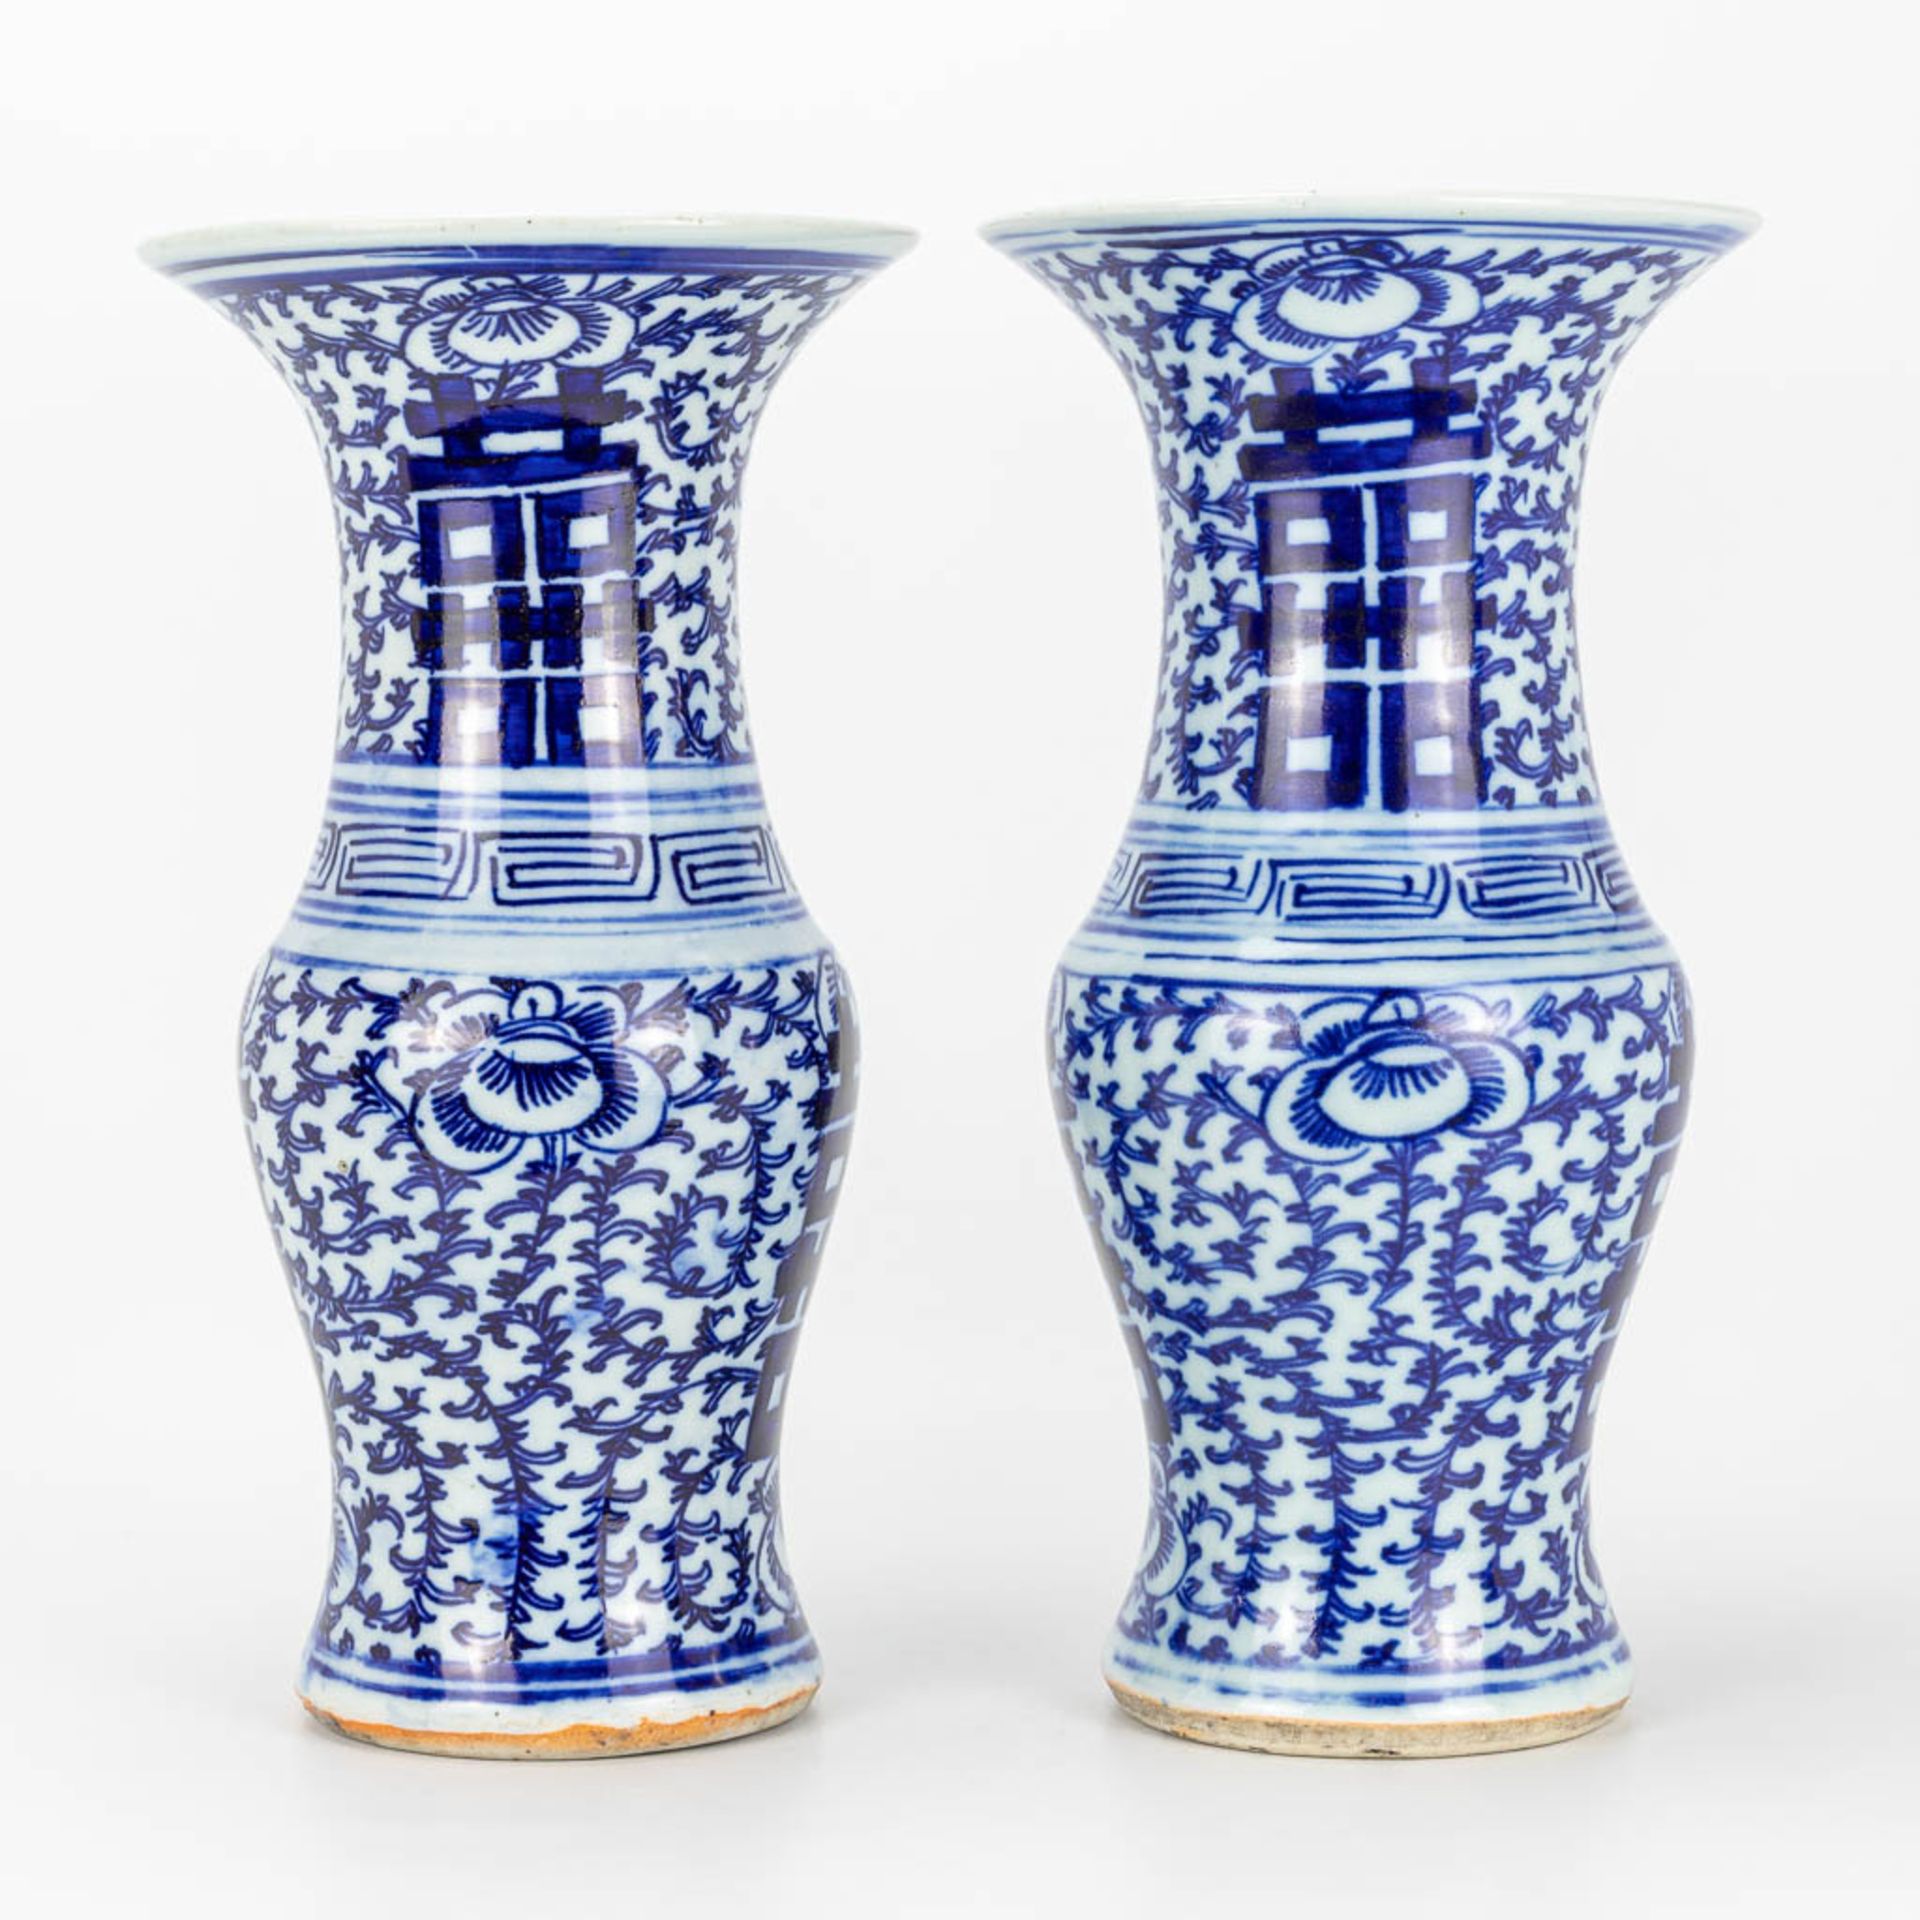 A pair of vases made of Chinese blue-white porcelain with 'Double Xi-sign' symbols of happiness. - Image 6 of 13